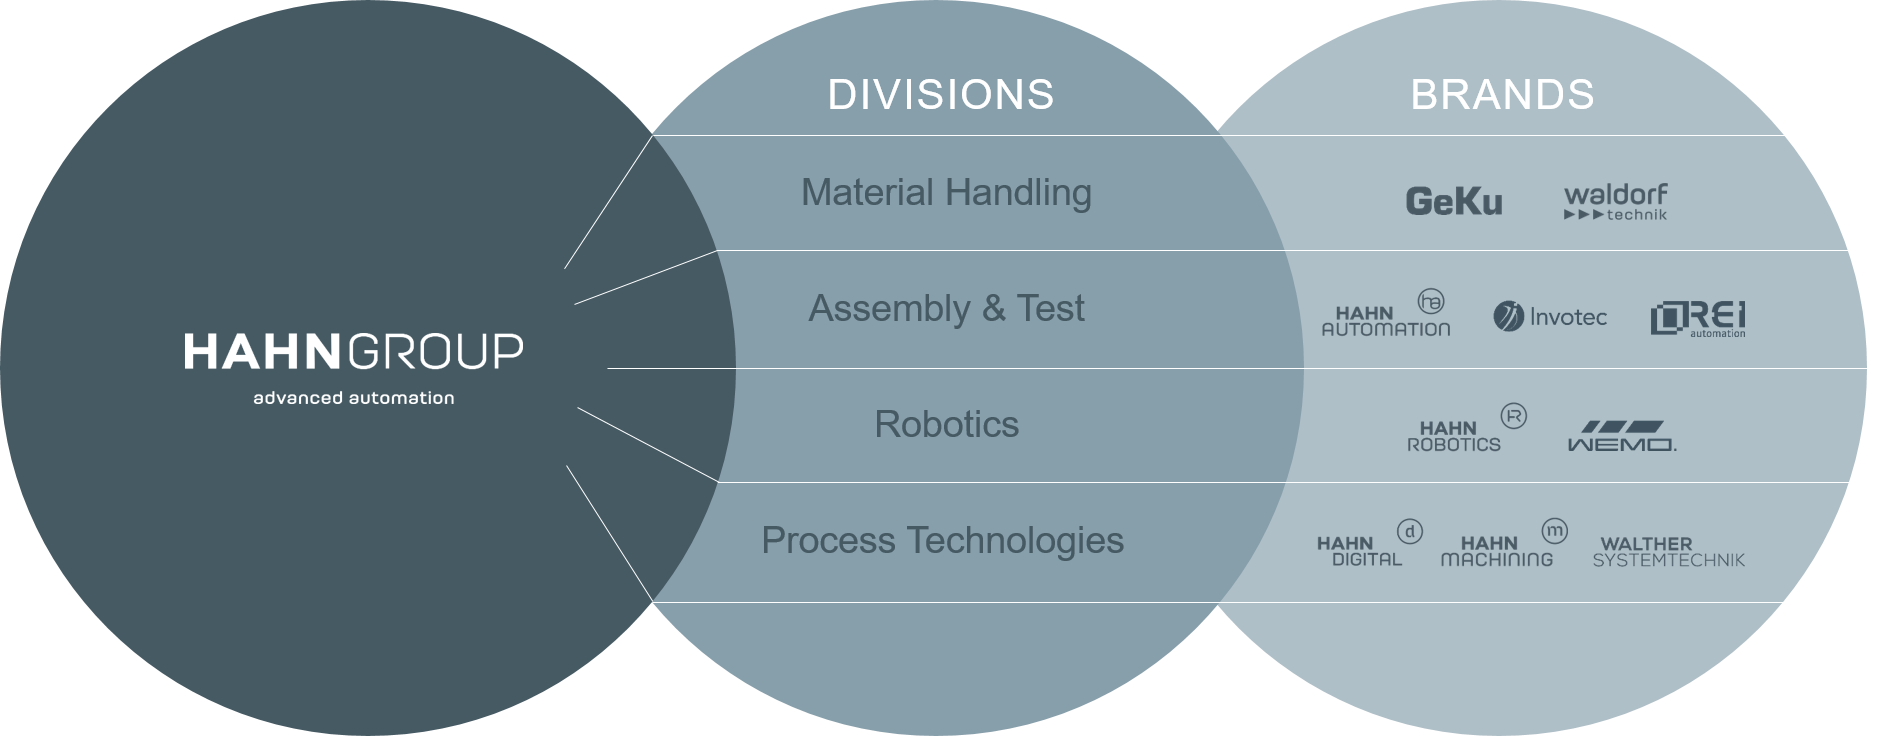 hahn group divisions are material handling, assembly and test, robotics, and process technologies